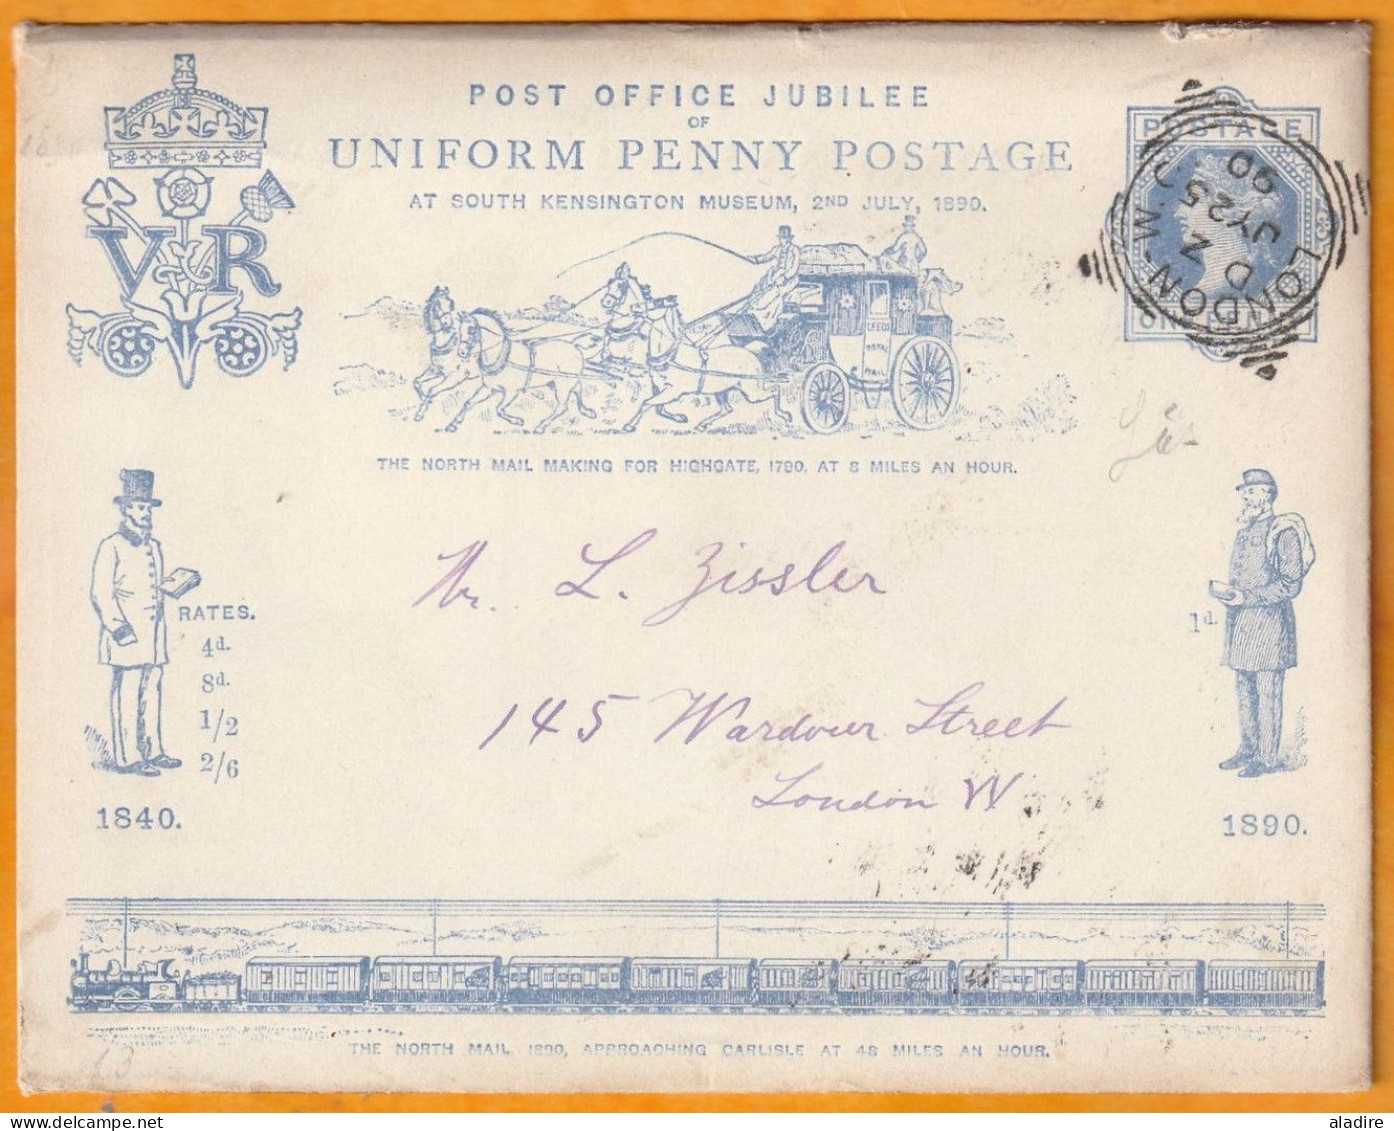 1890 - QV - Post Office Jubilee Of Uniform Penny Postage From London To The City (cover And Card) - ROWLAND HILL - Postmark Collection